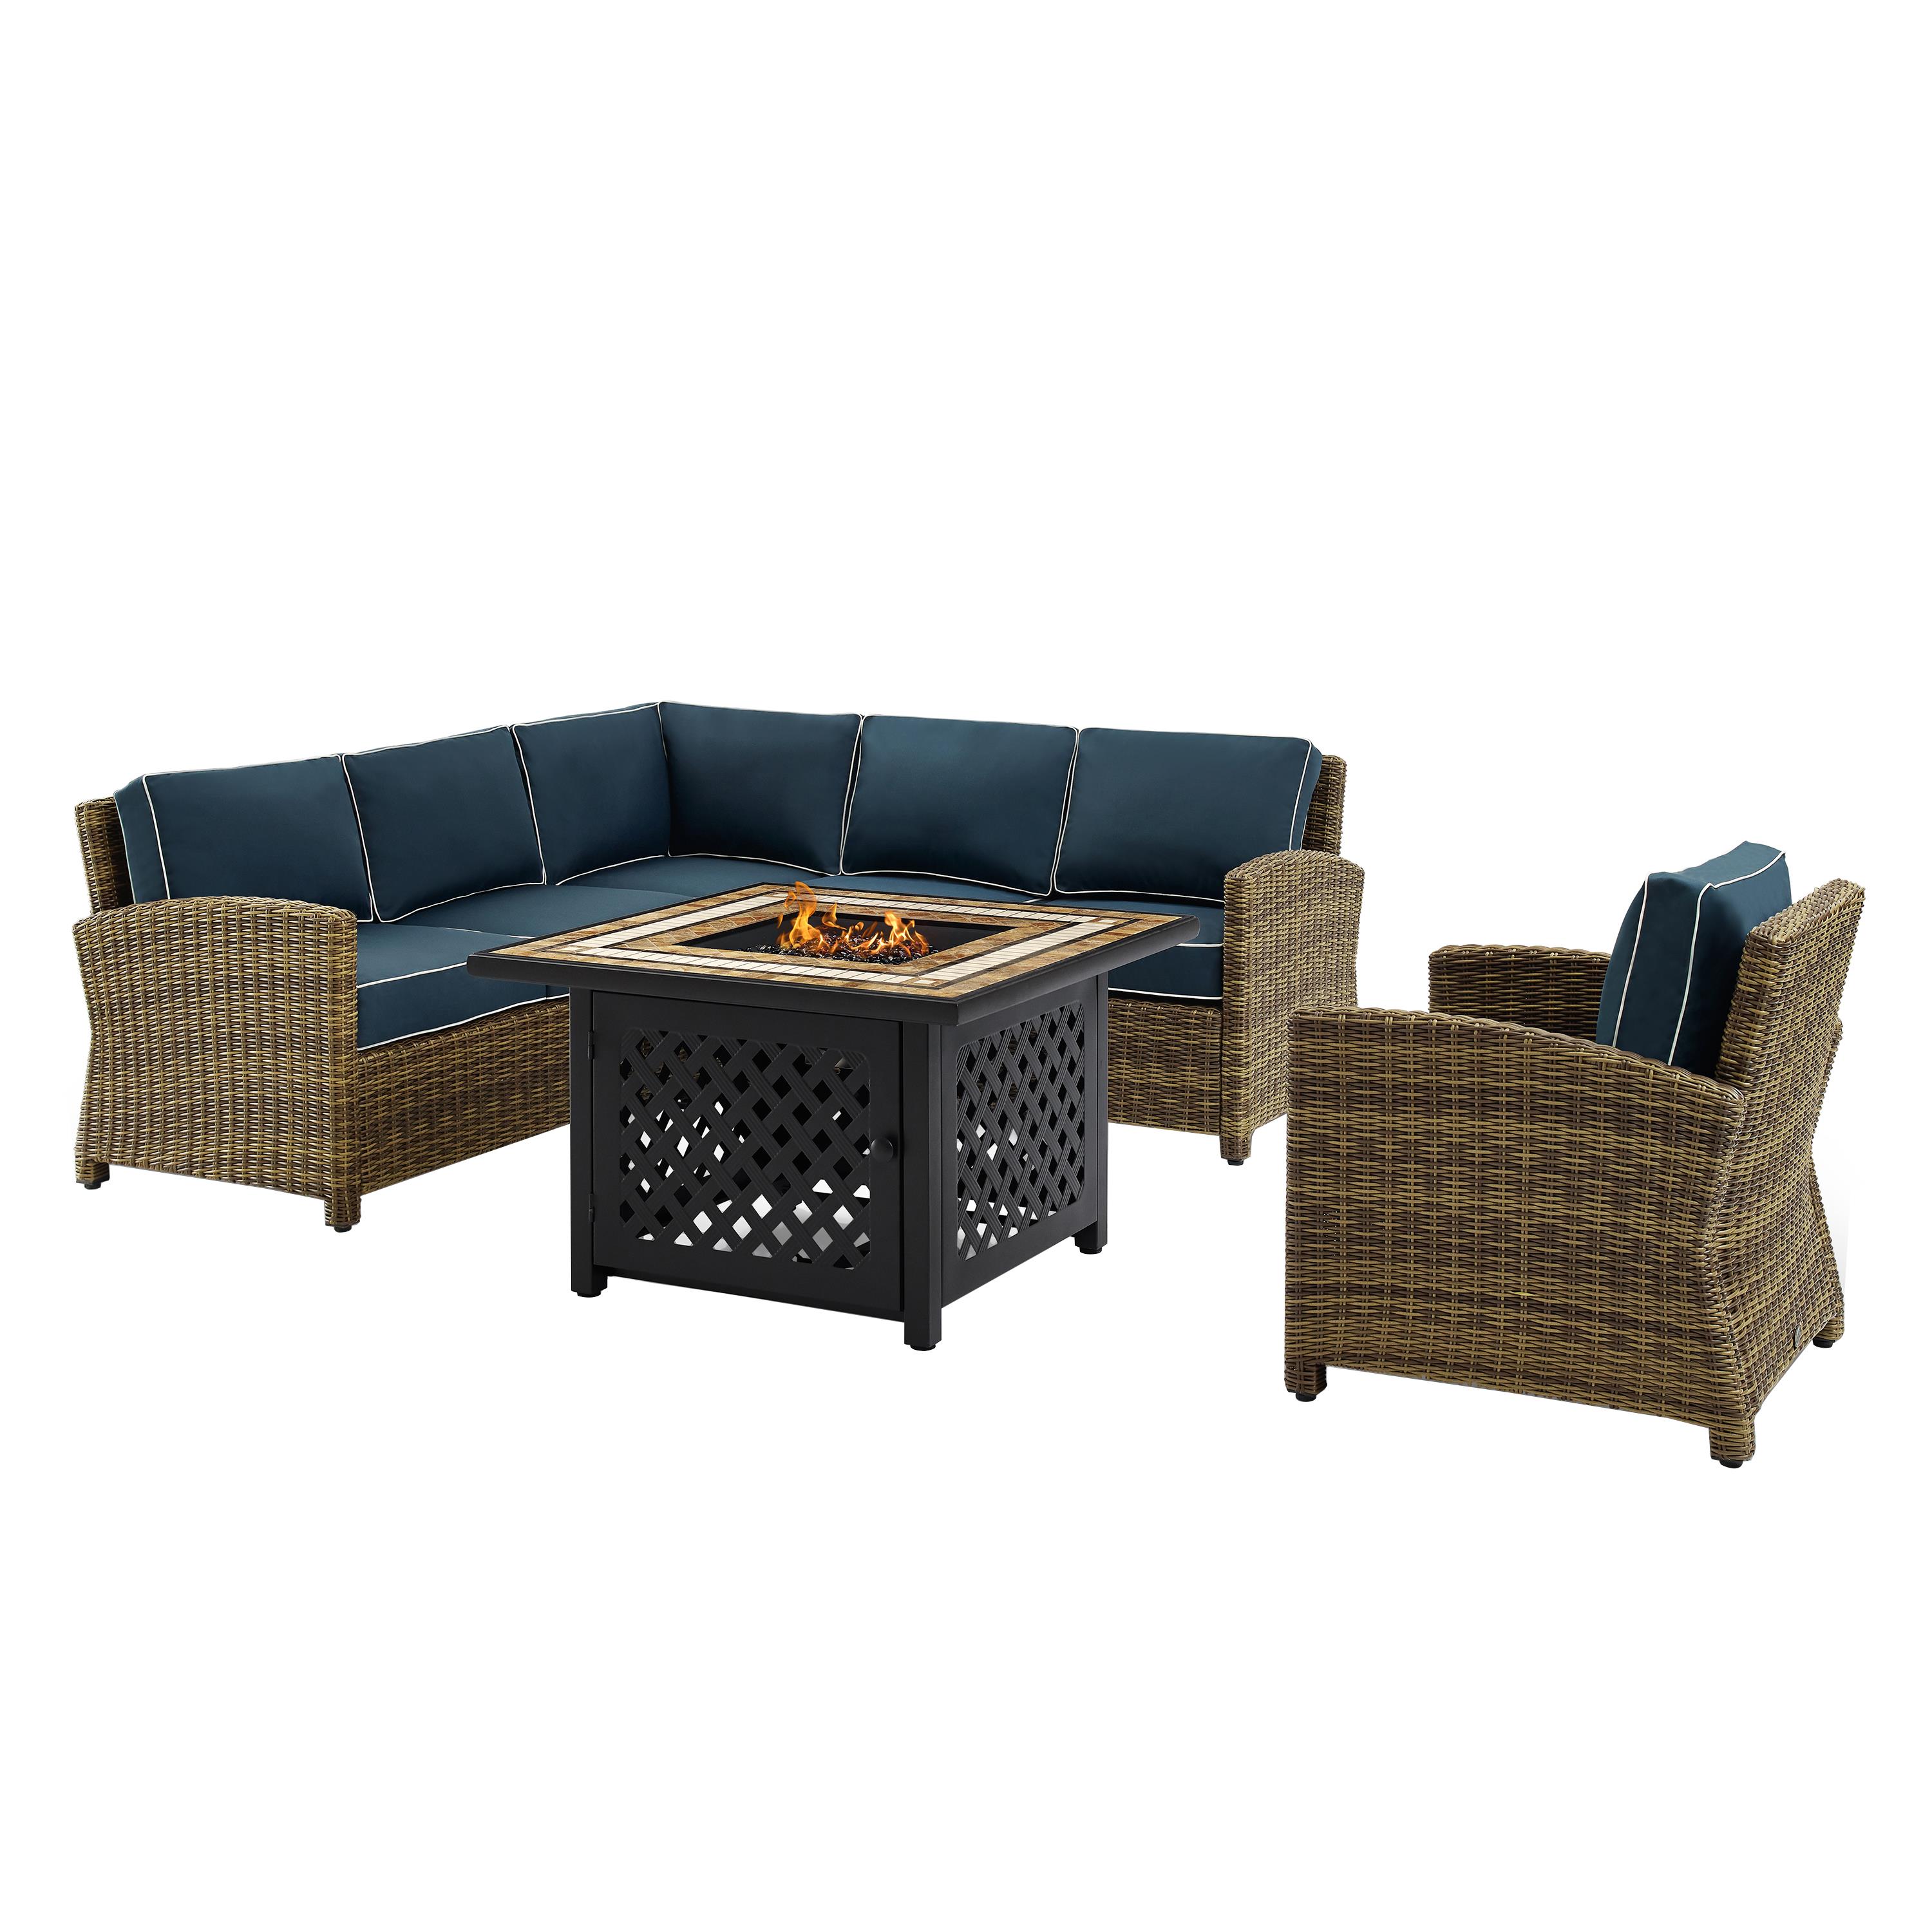 Bradenton 5Pc Outdoor Wicker Sectional Set W/Fire Table Weathered Brown/Navy - Right Corner Loveseat, Left Corner Loveseat, Corner Chair, Armchair, & Tucson Fire Table - image 5 of 9